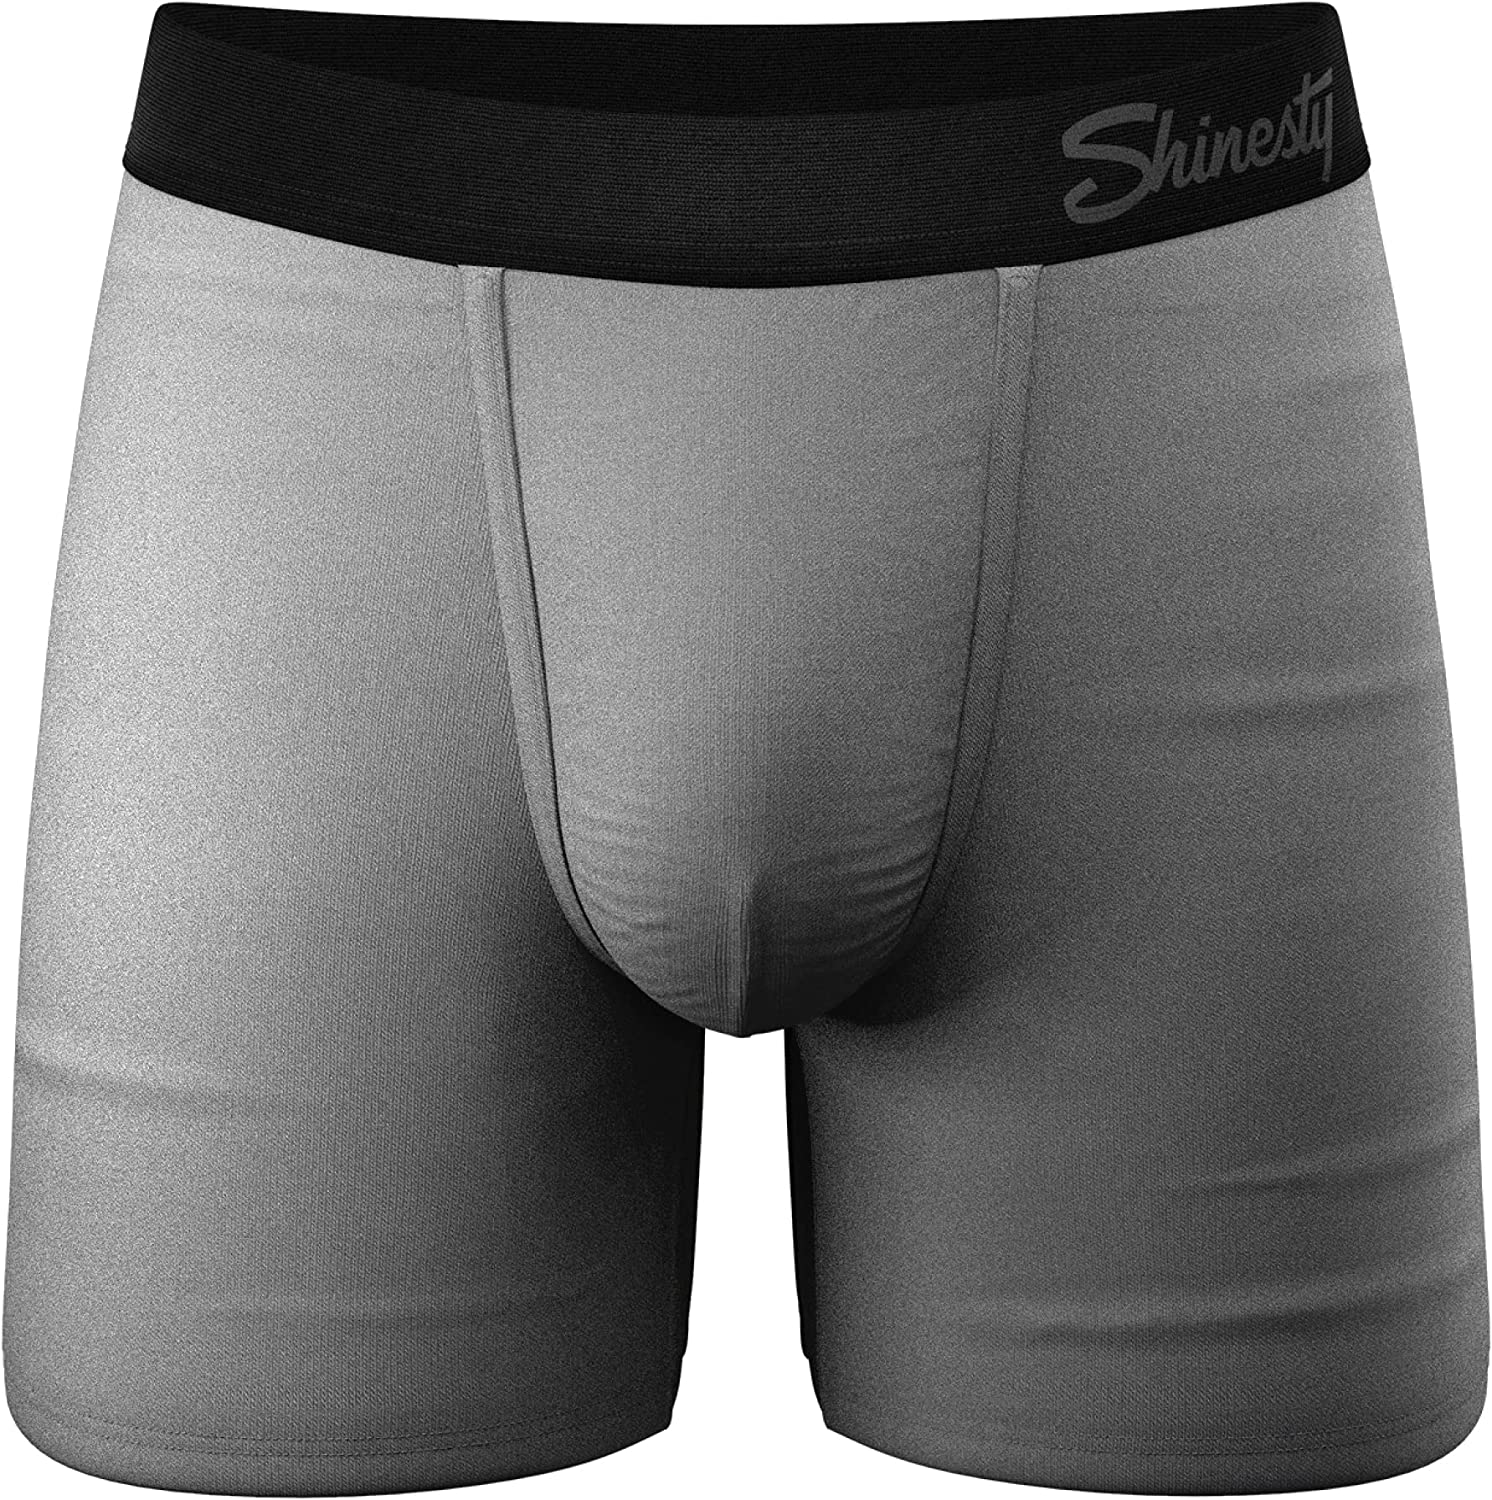 Shinesty paradICE Hammock Support Pouch Underwear, Cooling Boxer Briefs  Men, Breathable Quick Dry